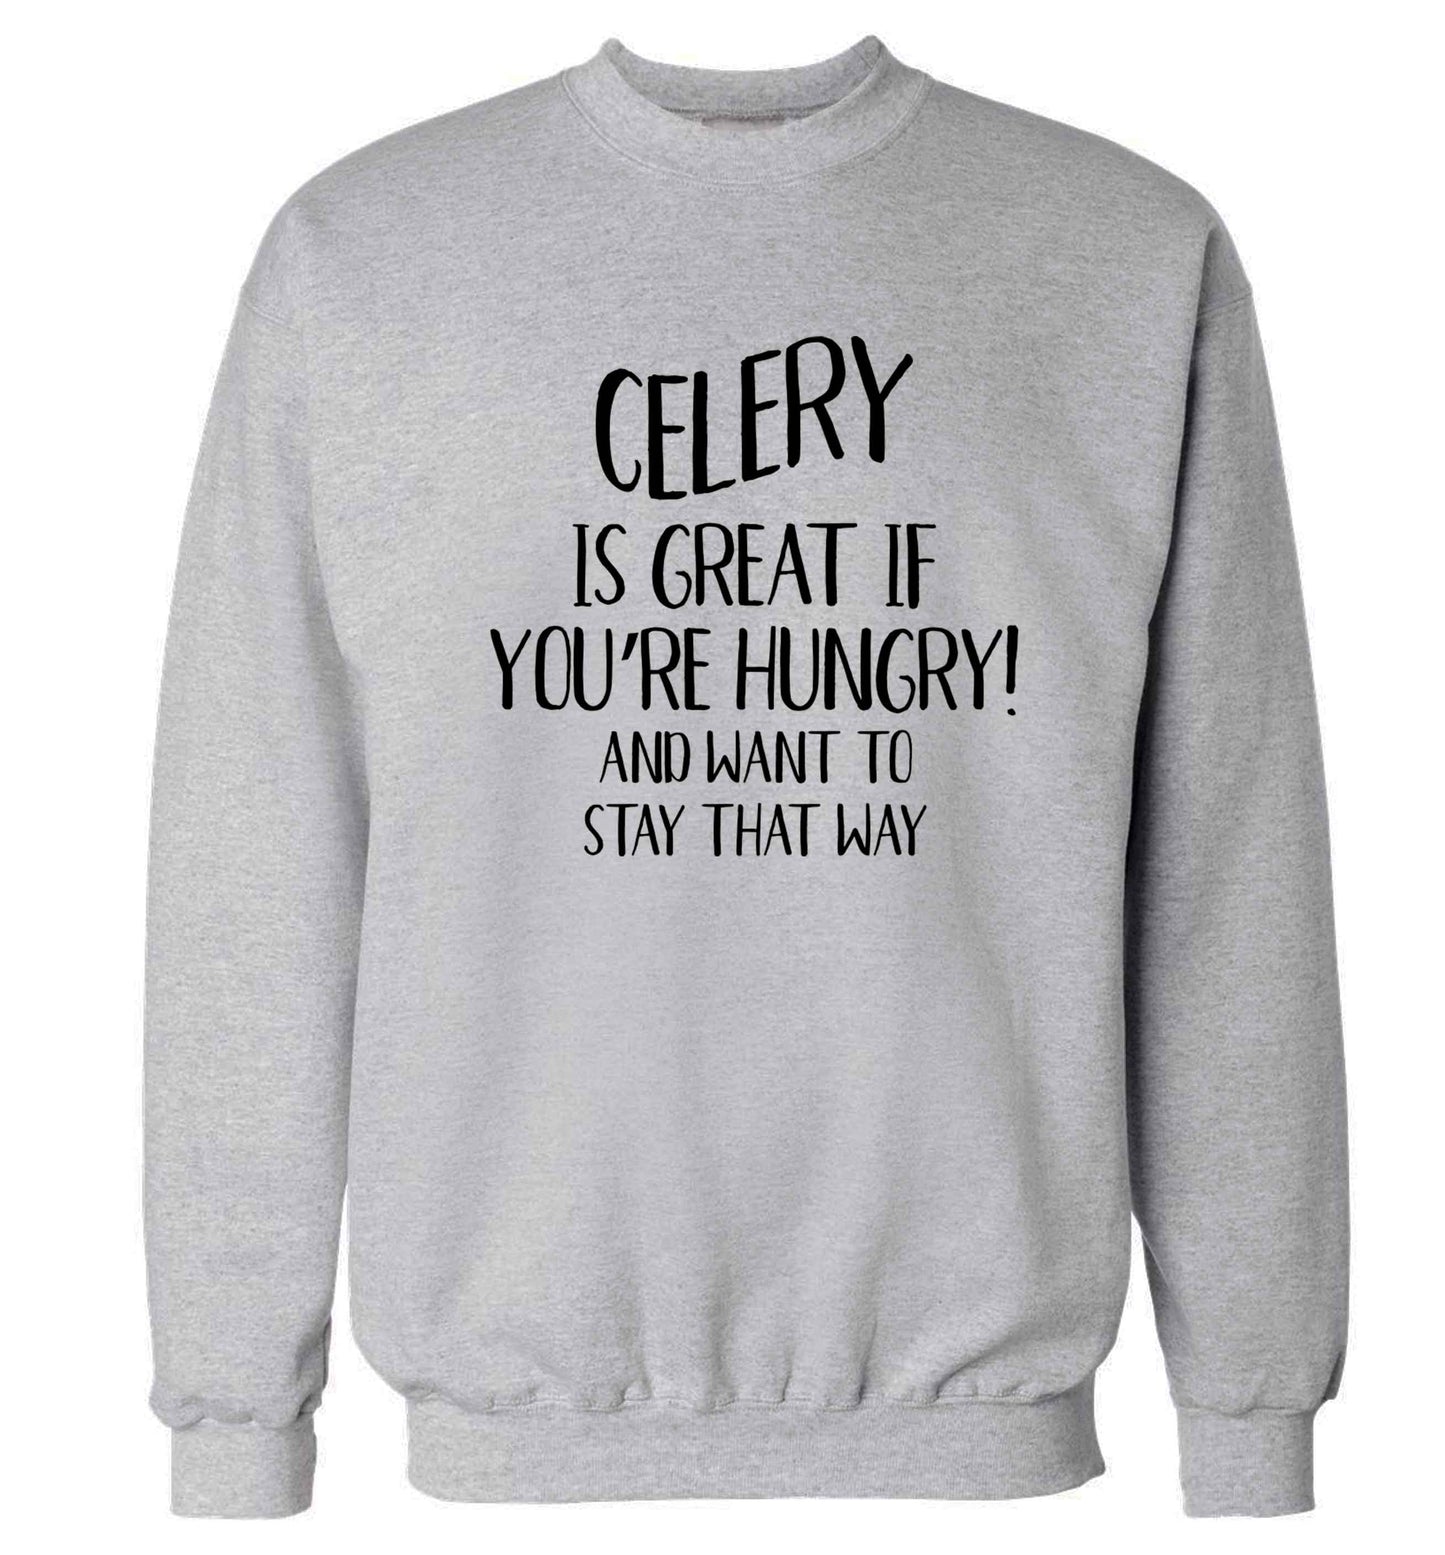 Cellery is great when you're hungry and want to stay that way Adult's unisex grey Sweater 2XL